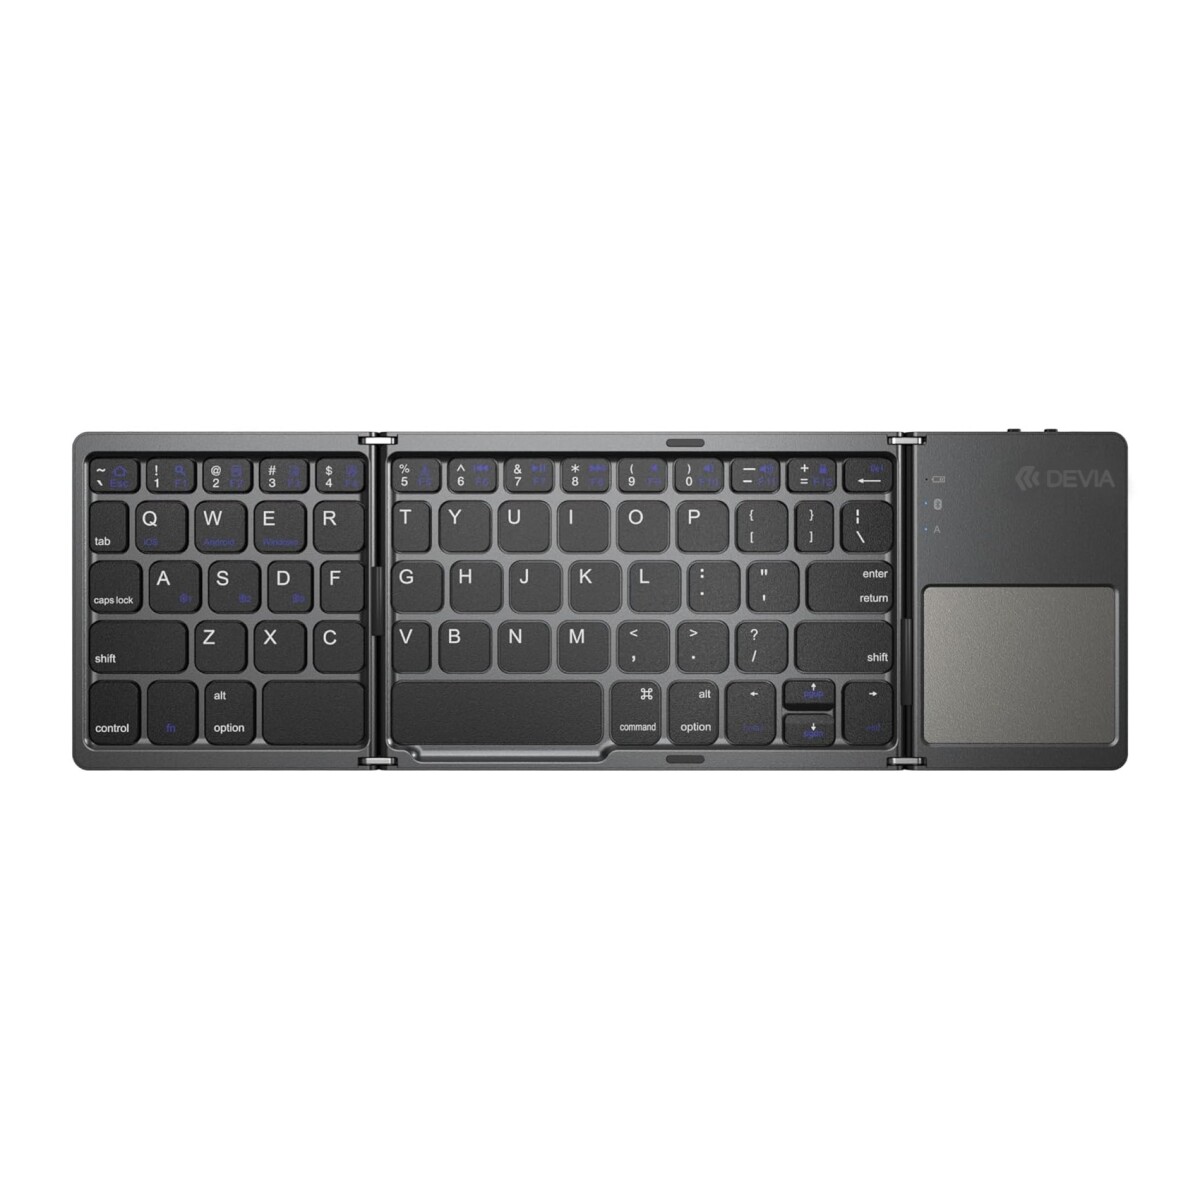 LINGO SERIES FOLDABLE WIRELESS KEYBOARD DEVIA WITH TOUCHPAD - Gray 